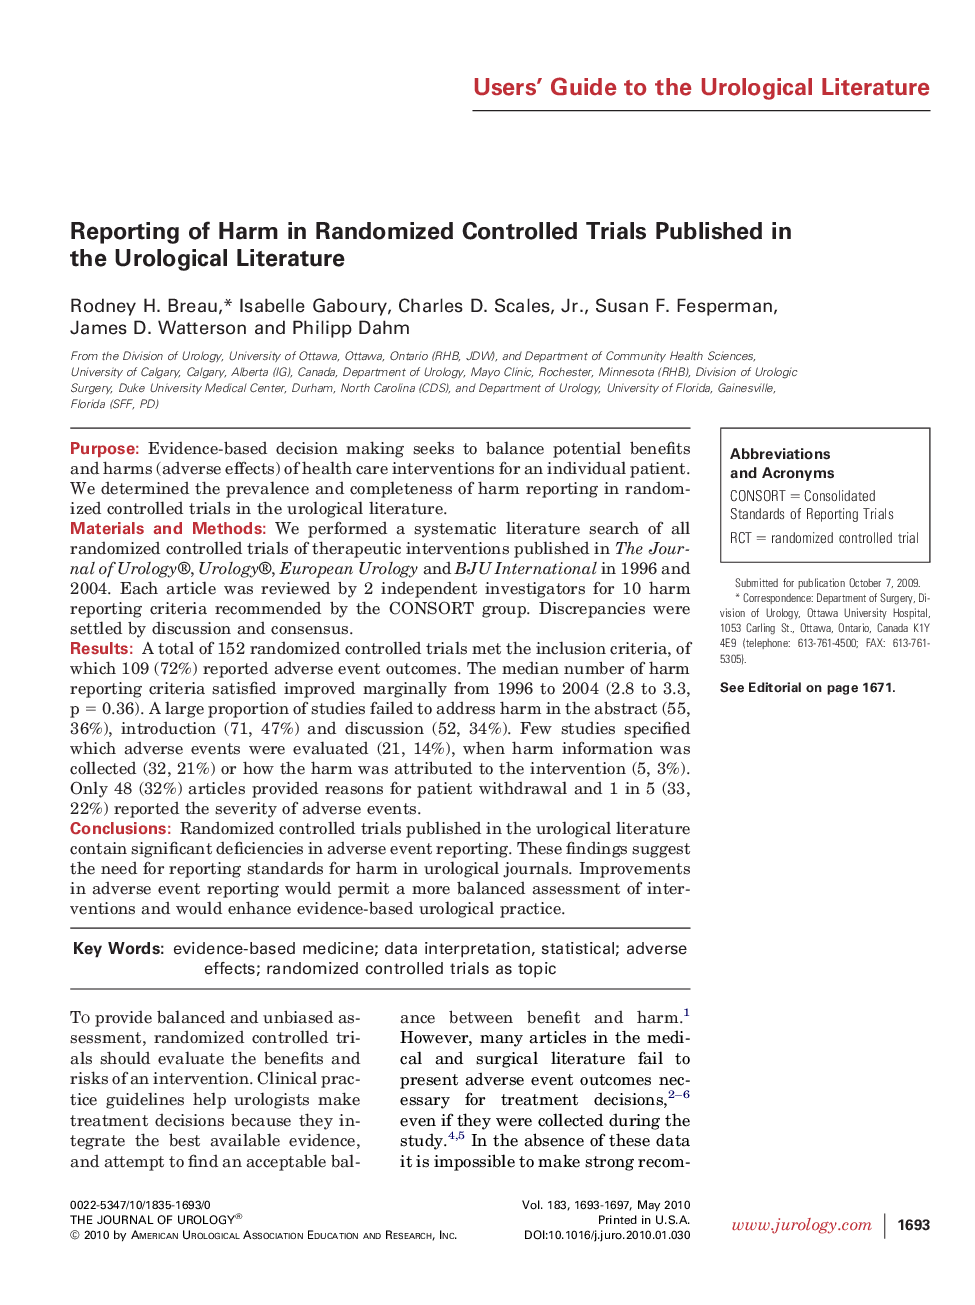 Reporting of Harm in Randomized Controlled Trials Published in the Urological Literature